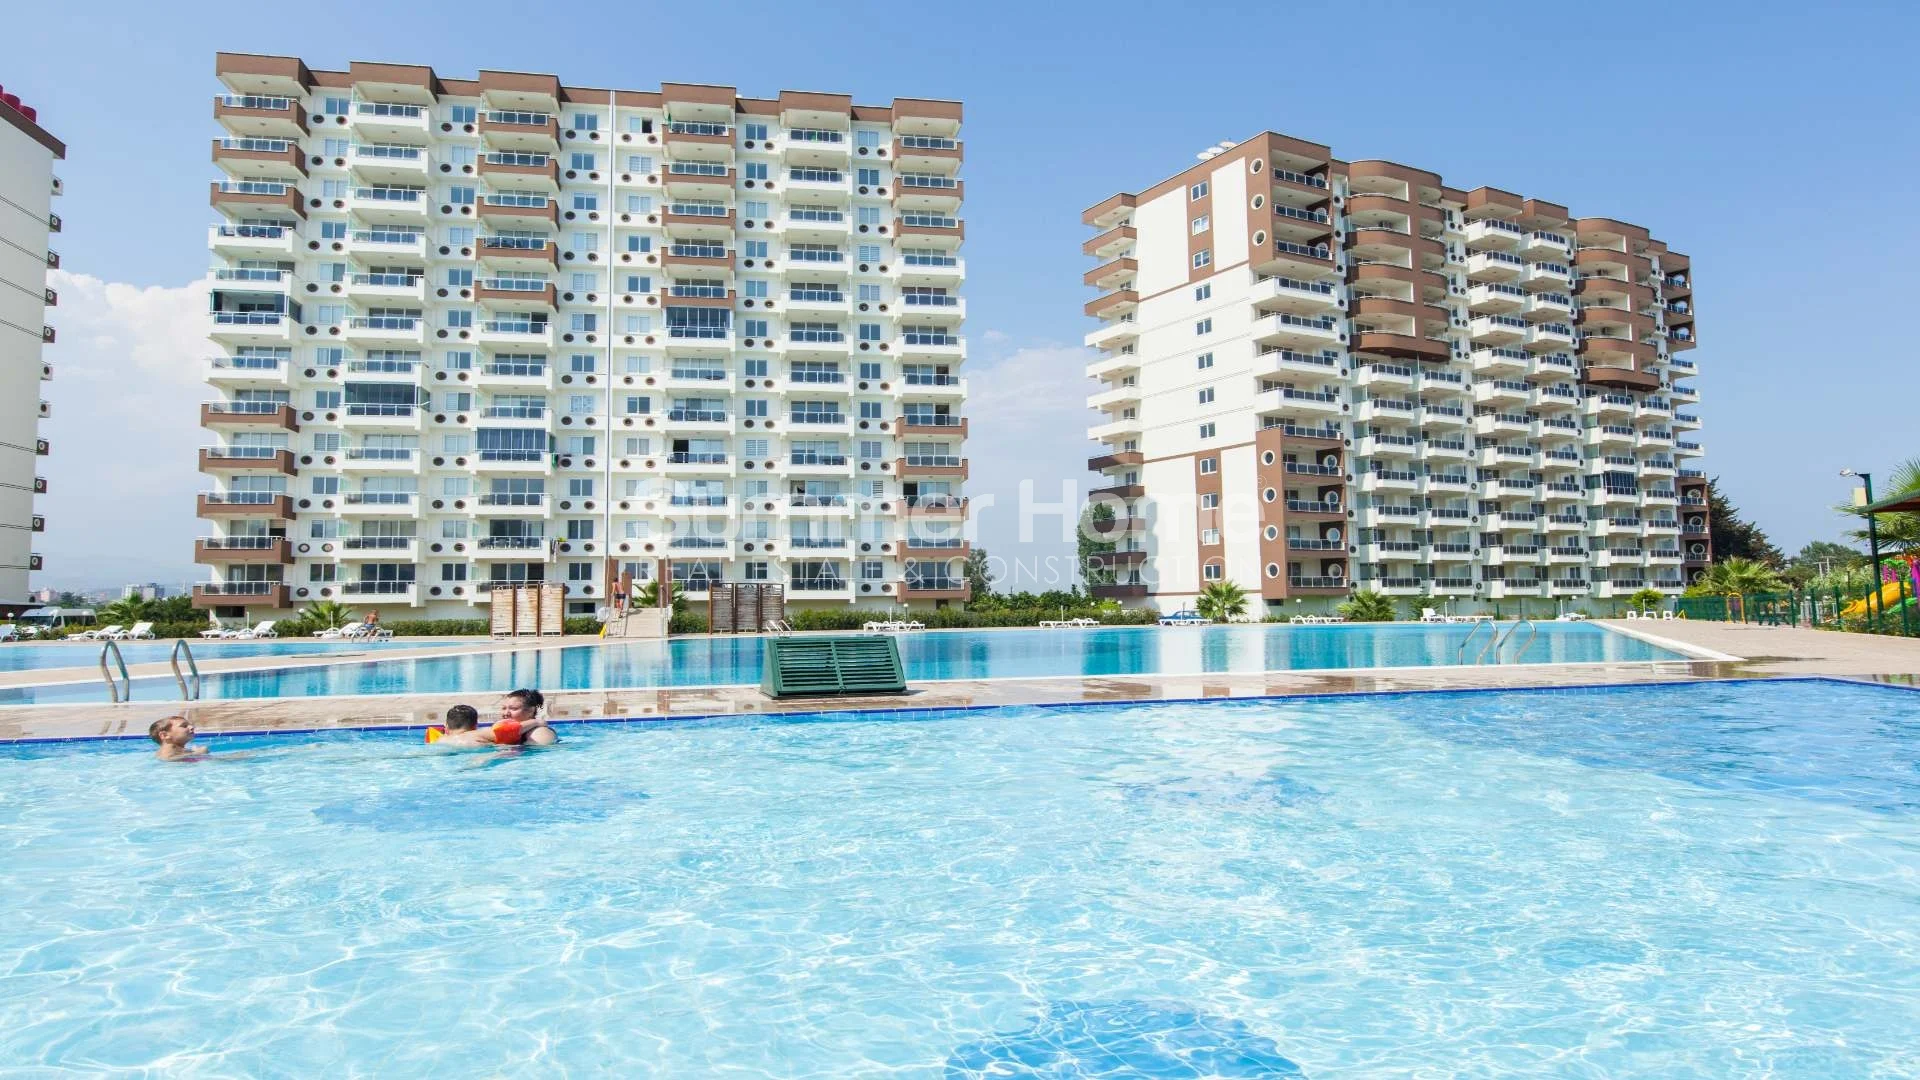 Holiday Apartments in Attractive Setting of Erdemli, Mersin Facilities - 21